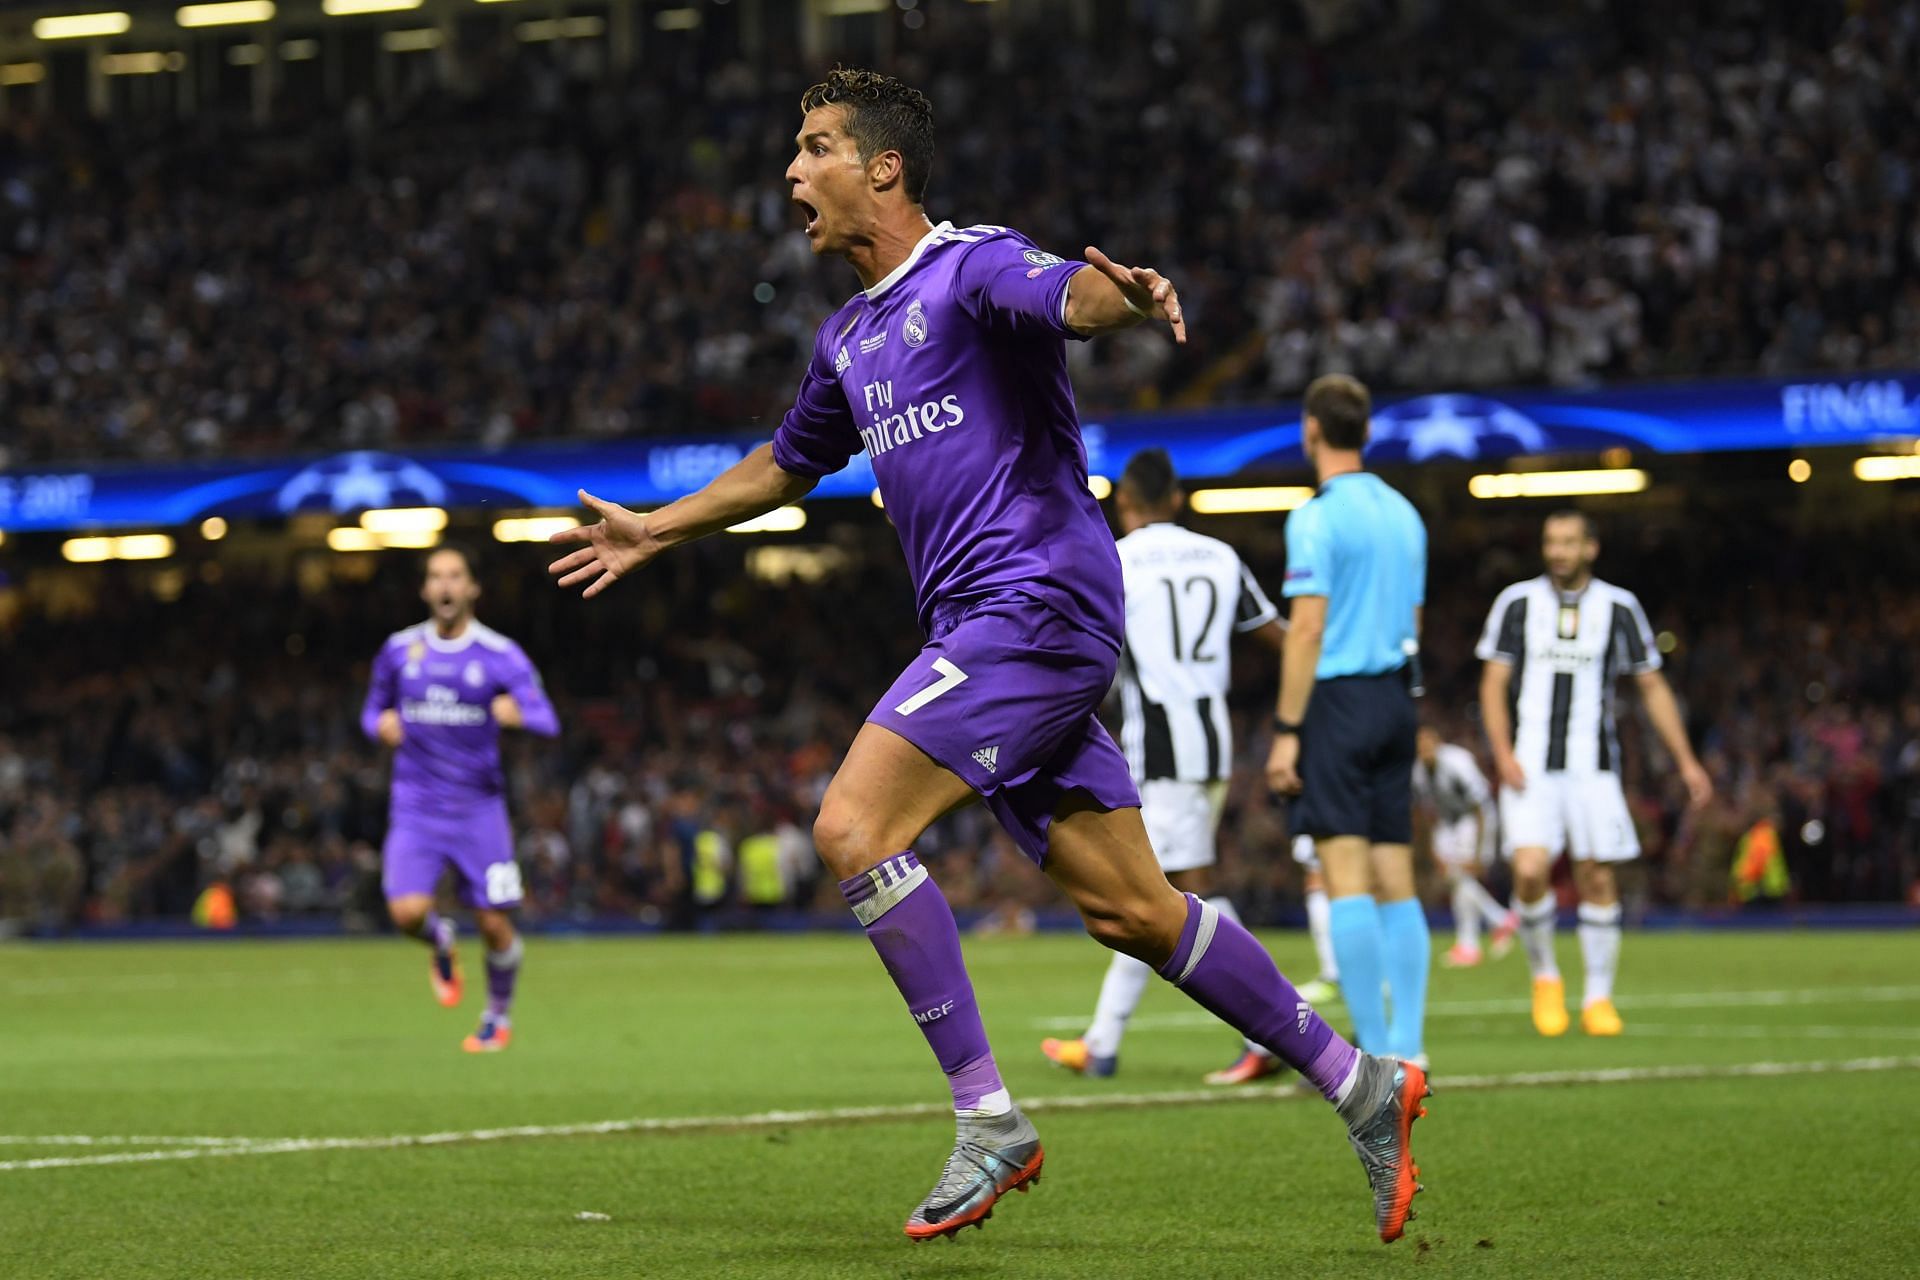 Ronaldo netted twice against Juventus in the 2017 finals